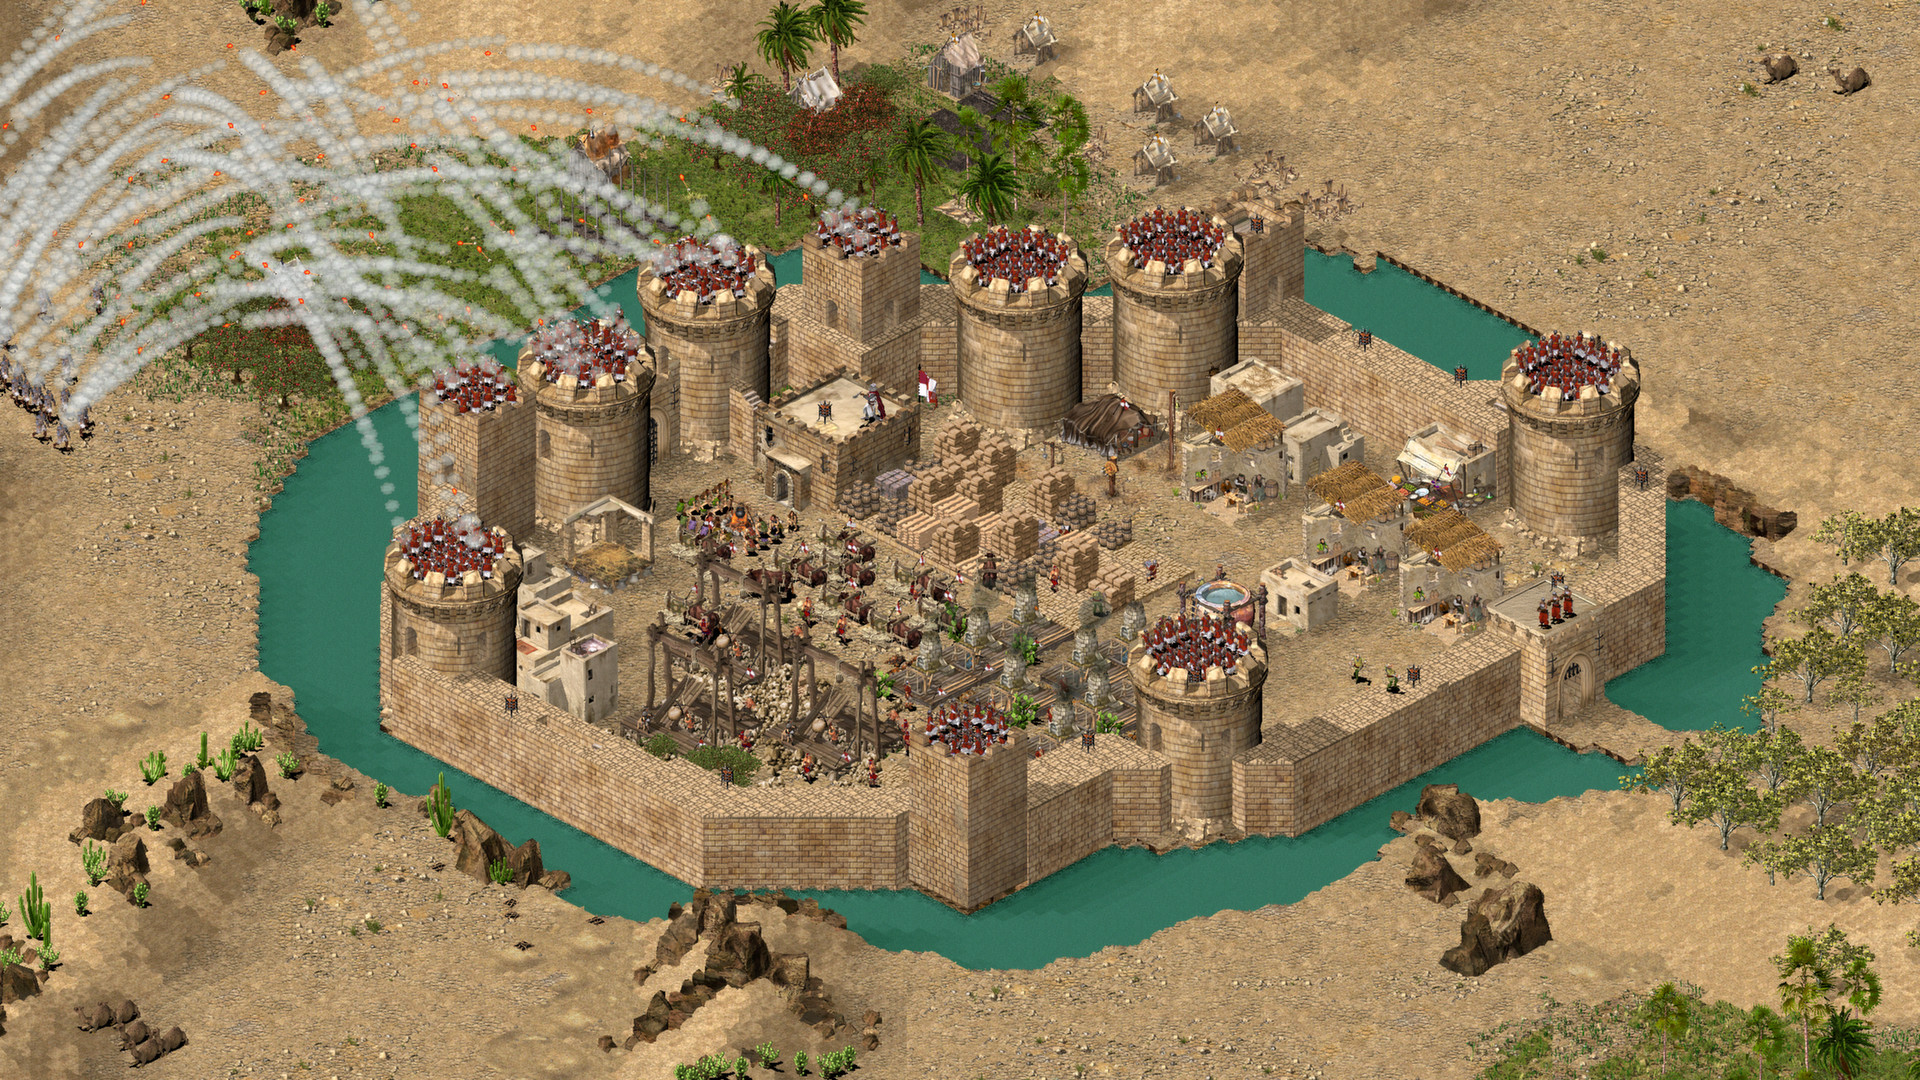 stronghold 1 free download full version zip